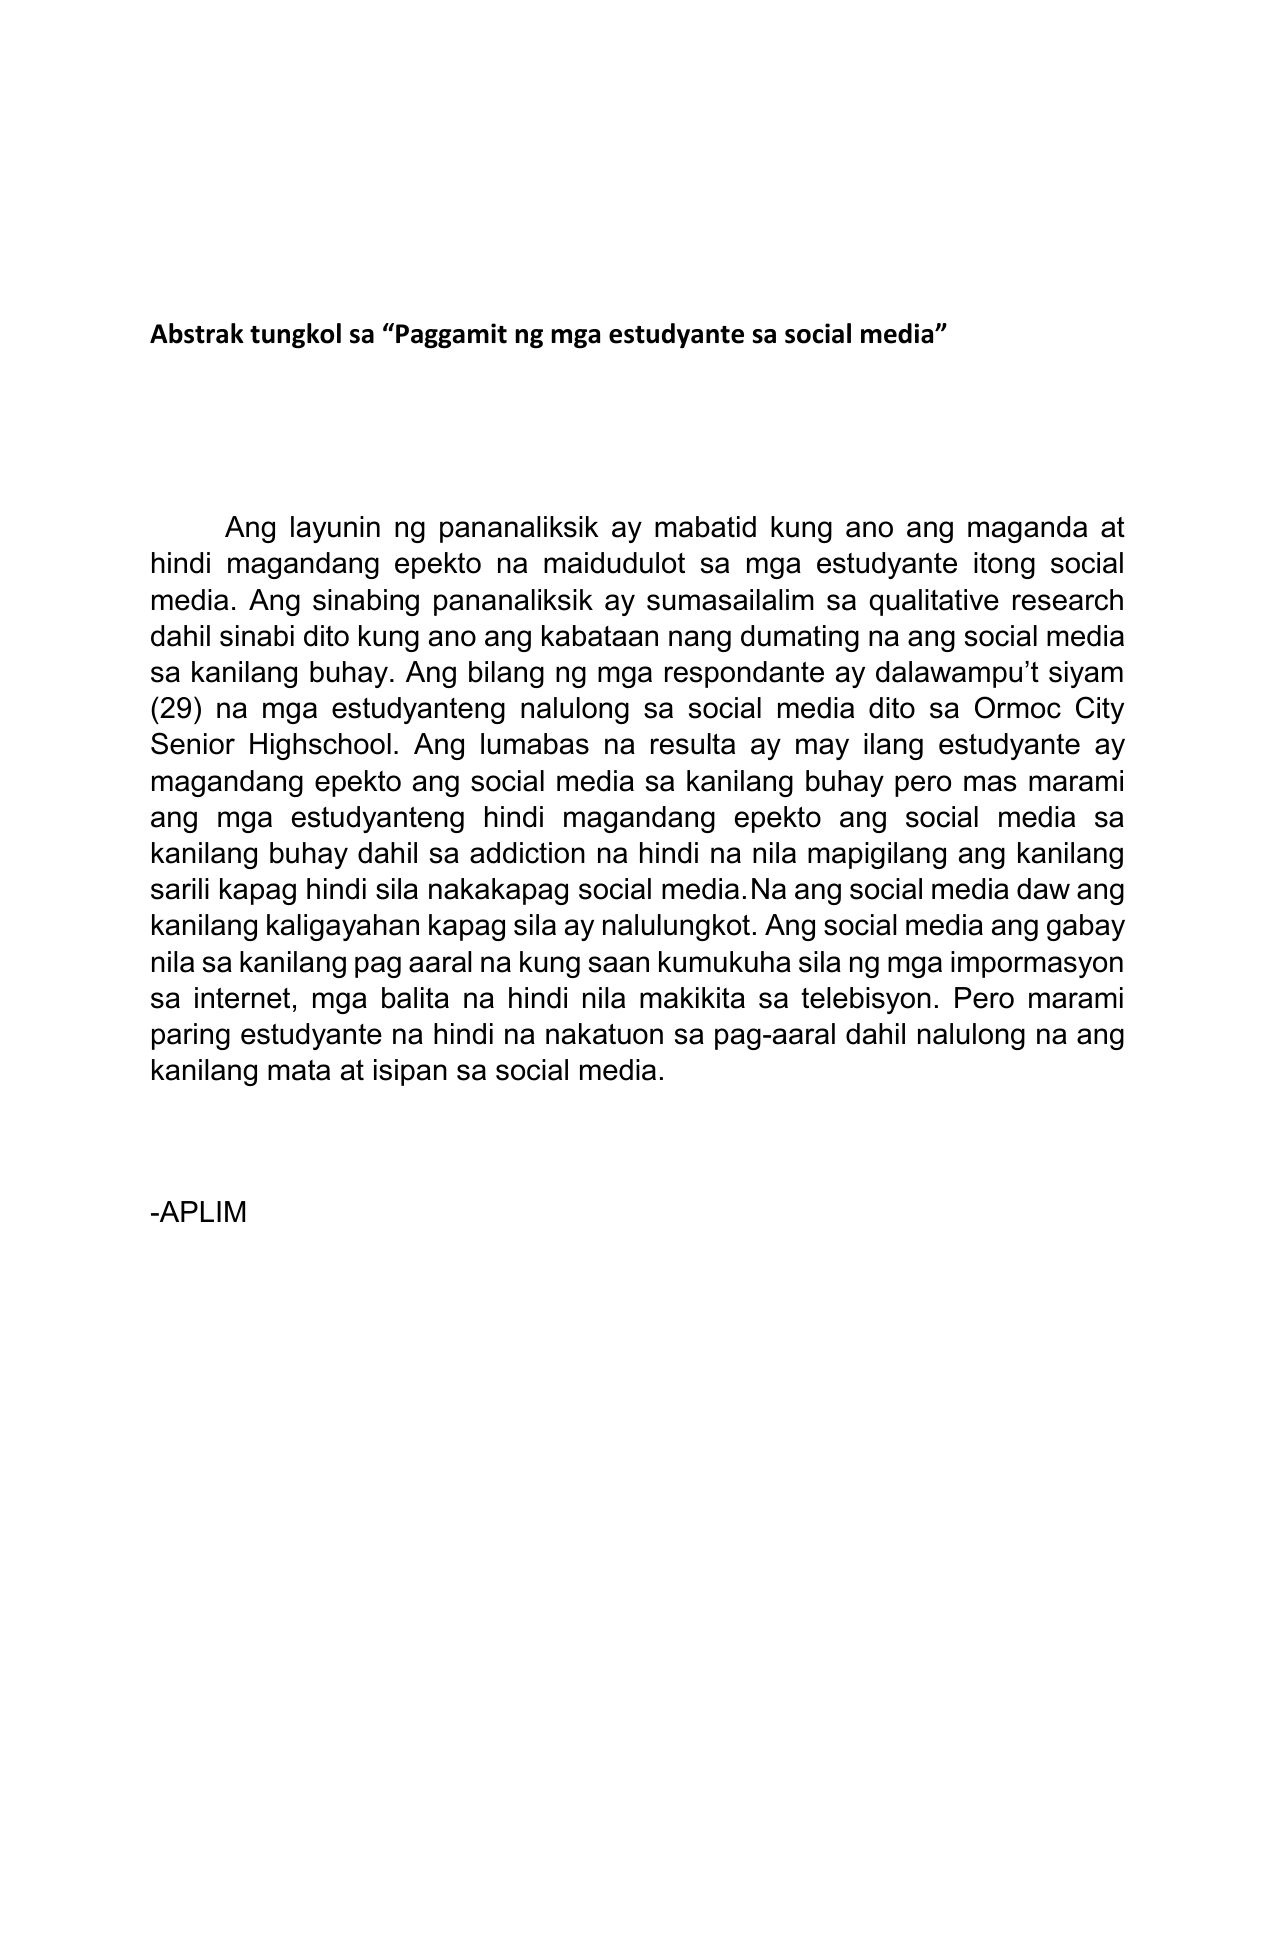 research abstract in filipino